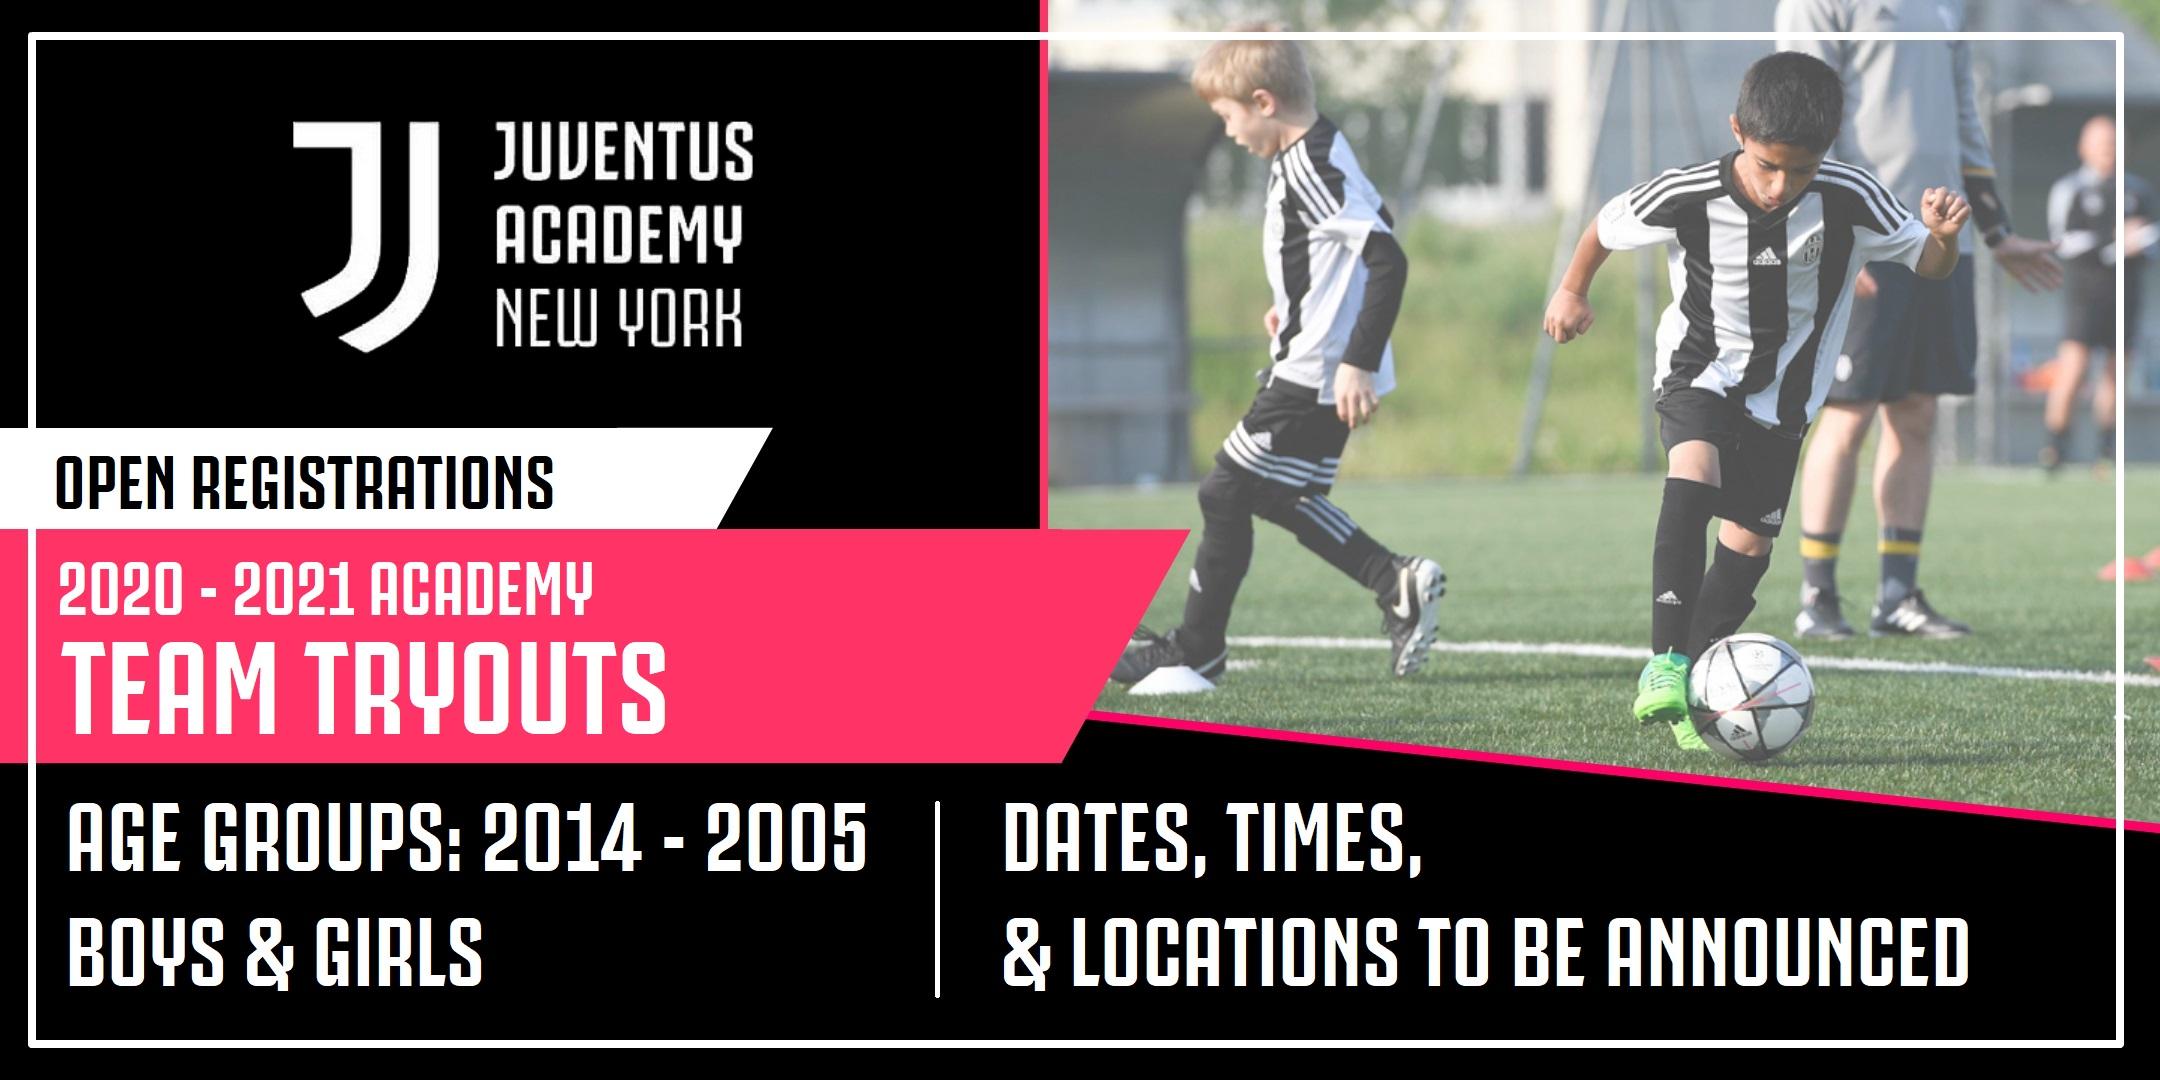 Juventus Academy NY: 2020 - 2021 Academy Team Tryouts